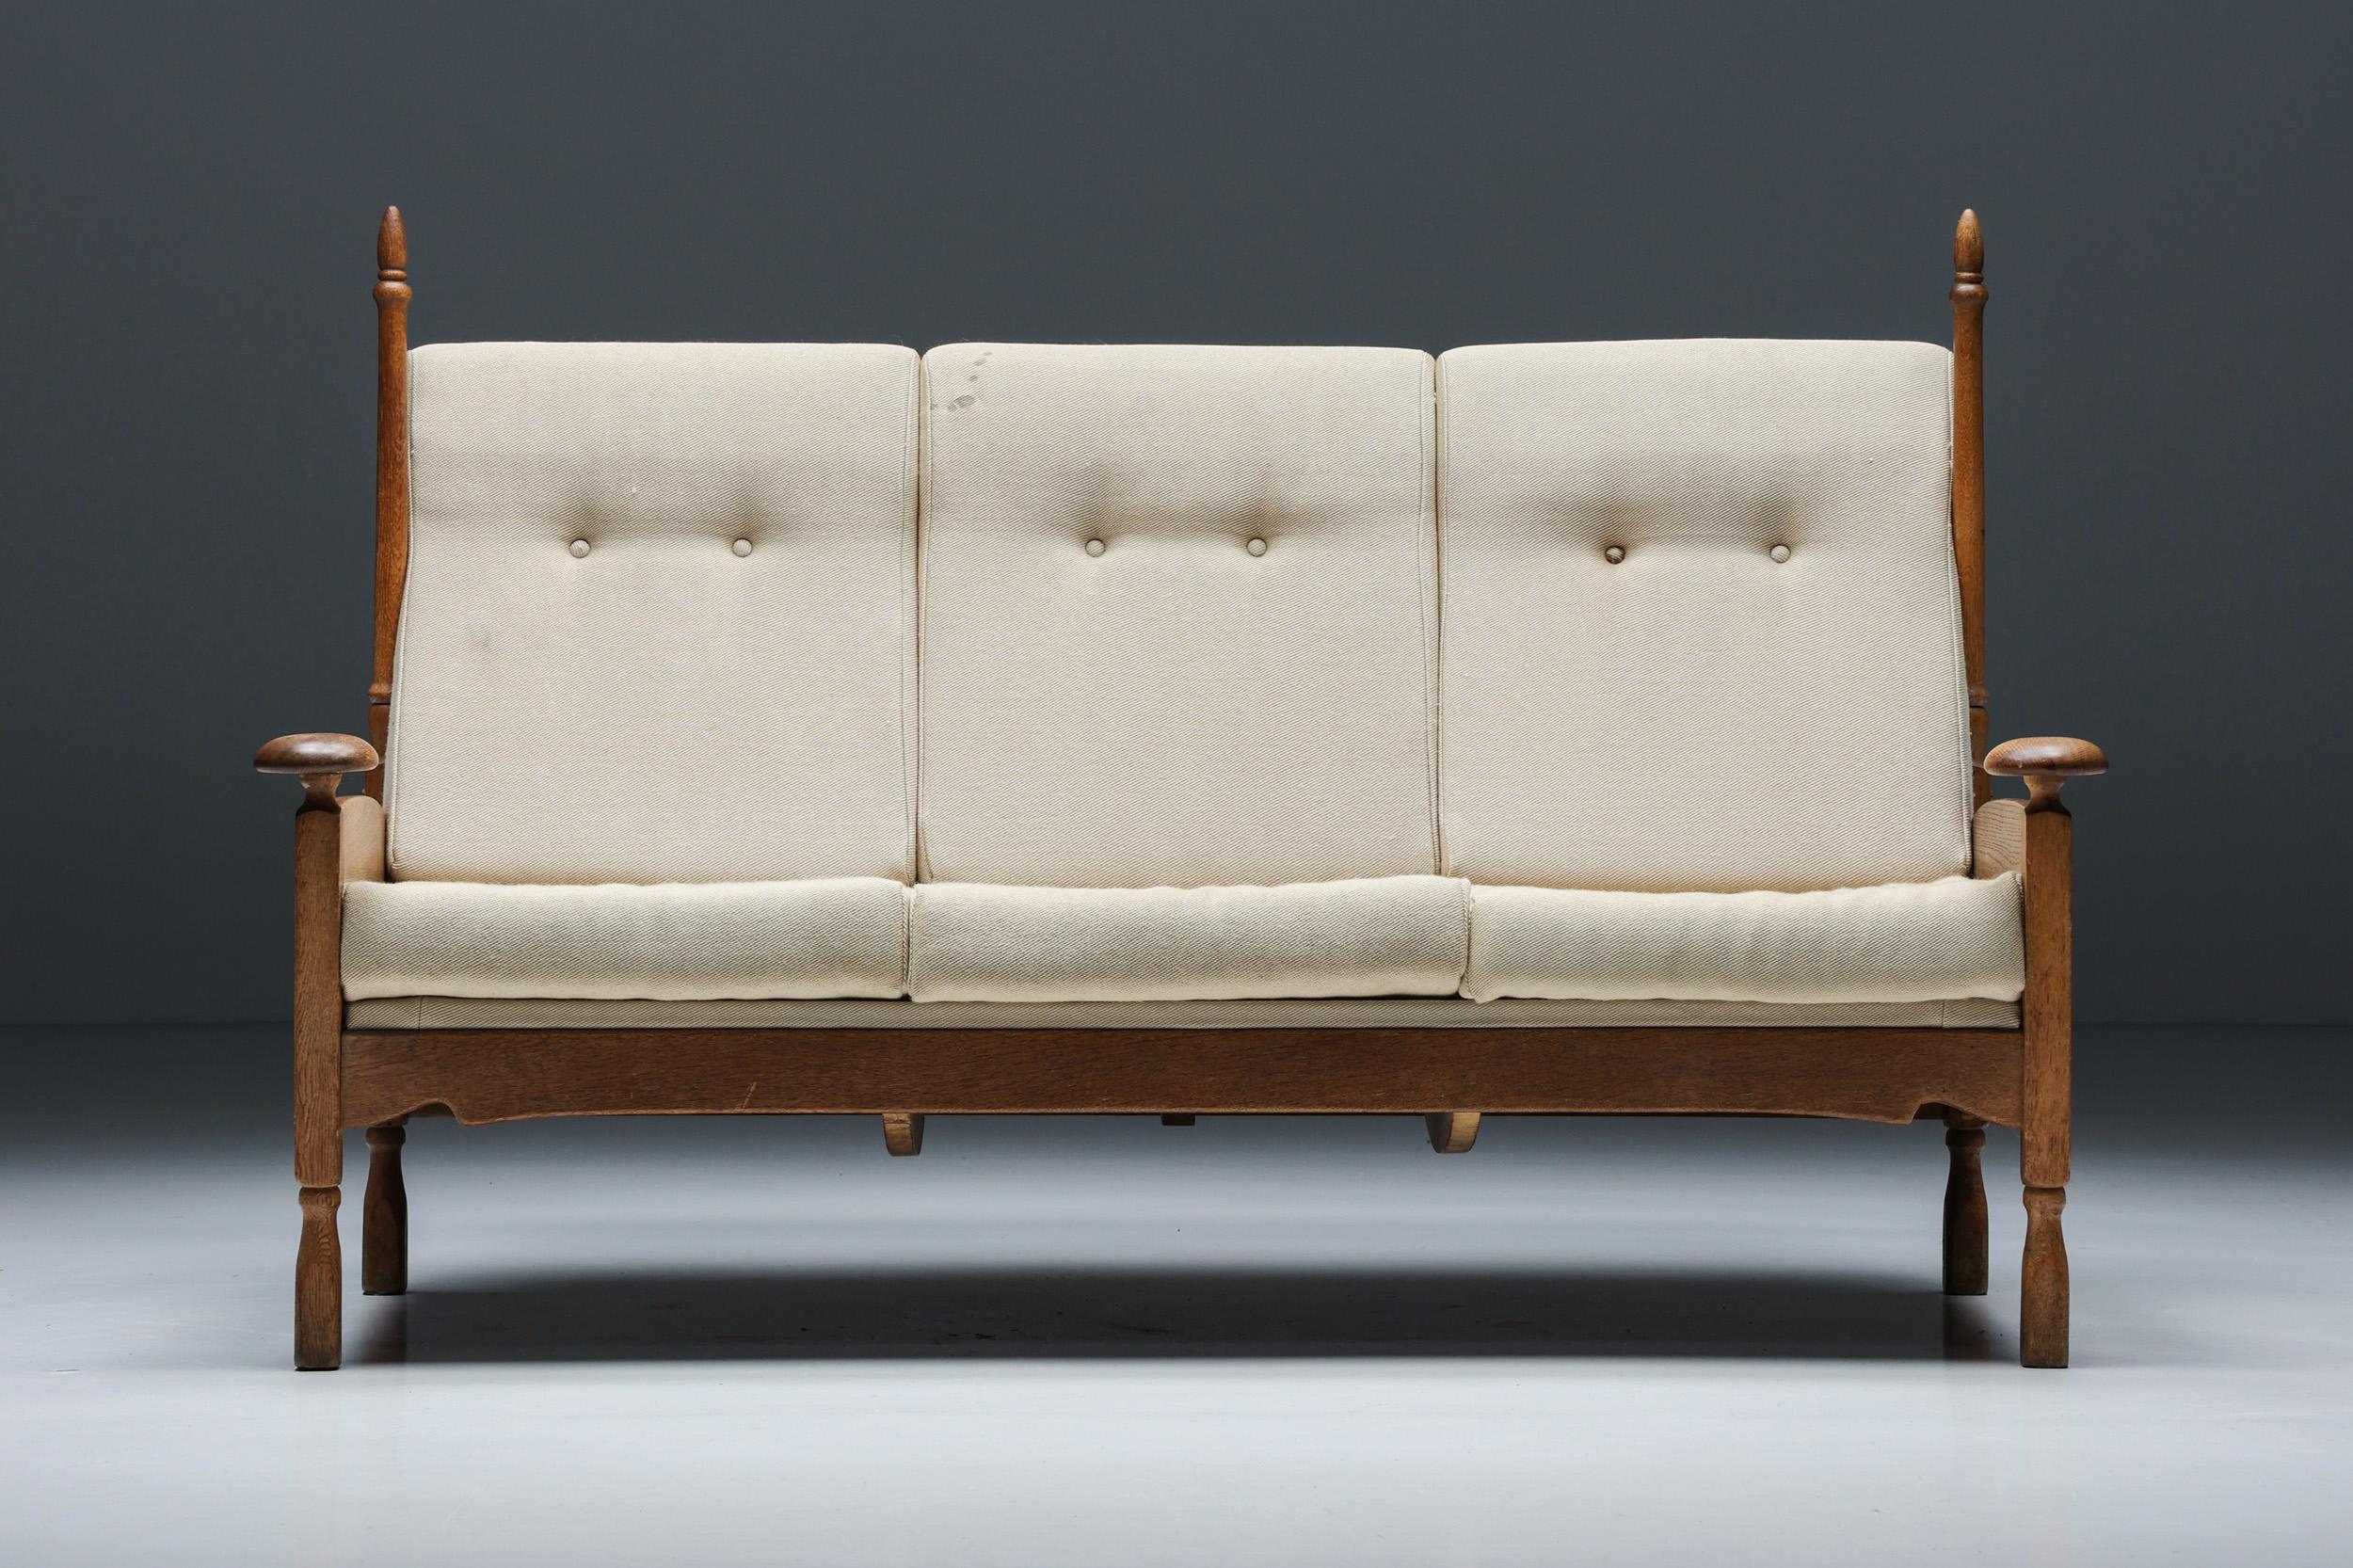 Dutch; Wood; Fabric; Throne Chair; Three-Seater Sofa; Mid-Century Modern; 1950s; Armchair; Lounge Sofa; Scandinavian Modern; Dutch Design; 

Mid-century modern throne three-seater sofa with a wooden frame and beige fabric cushions, made circa 1950s.